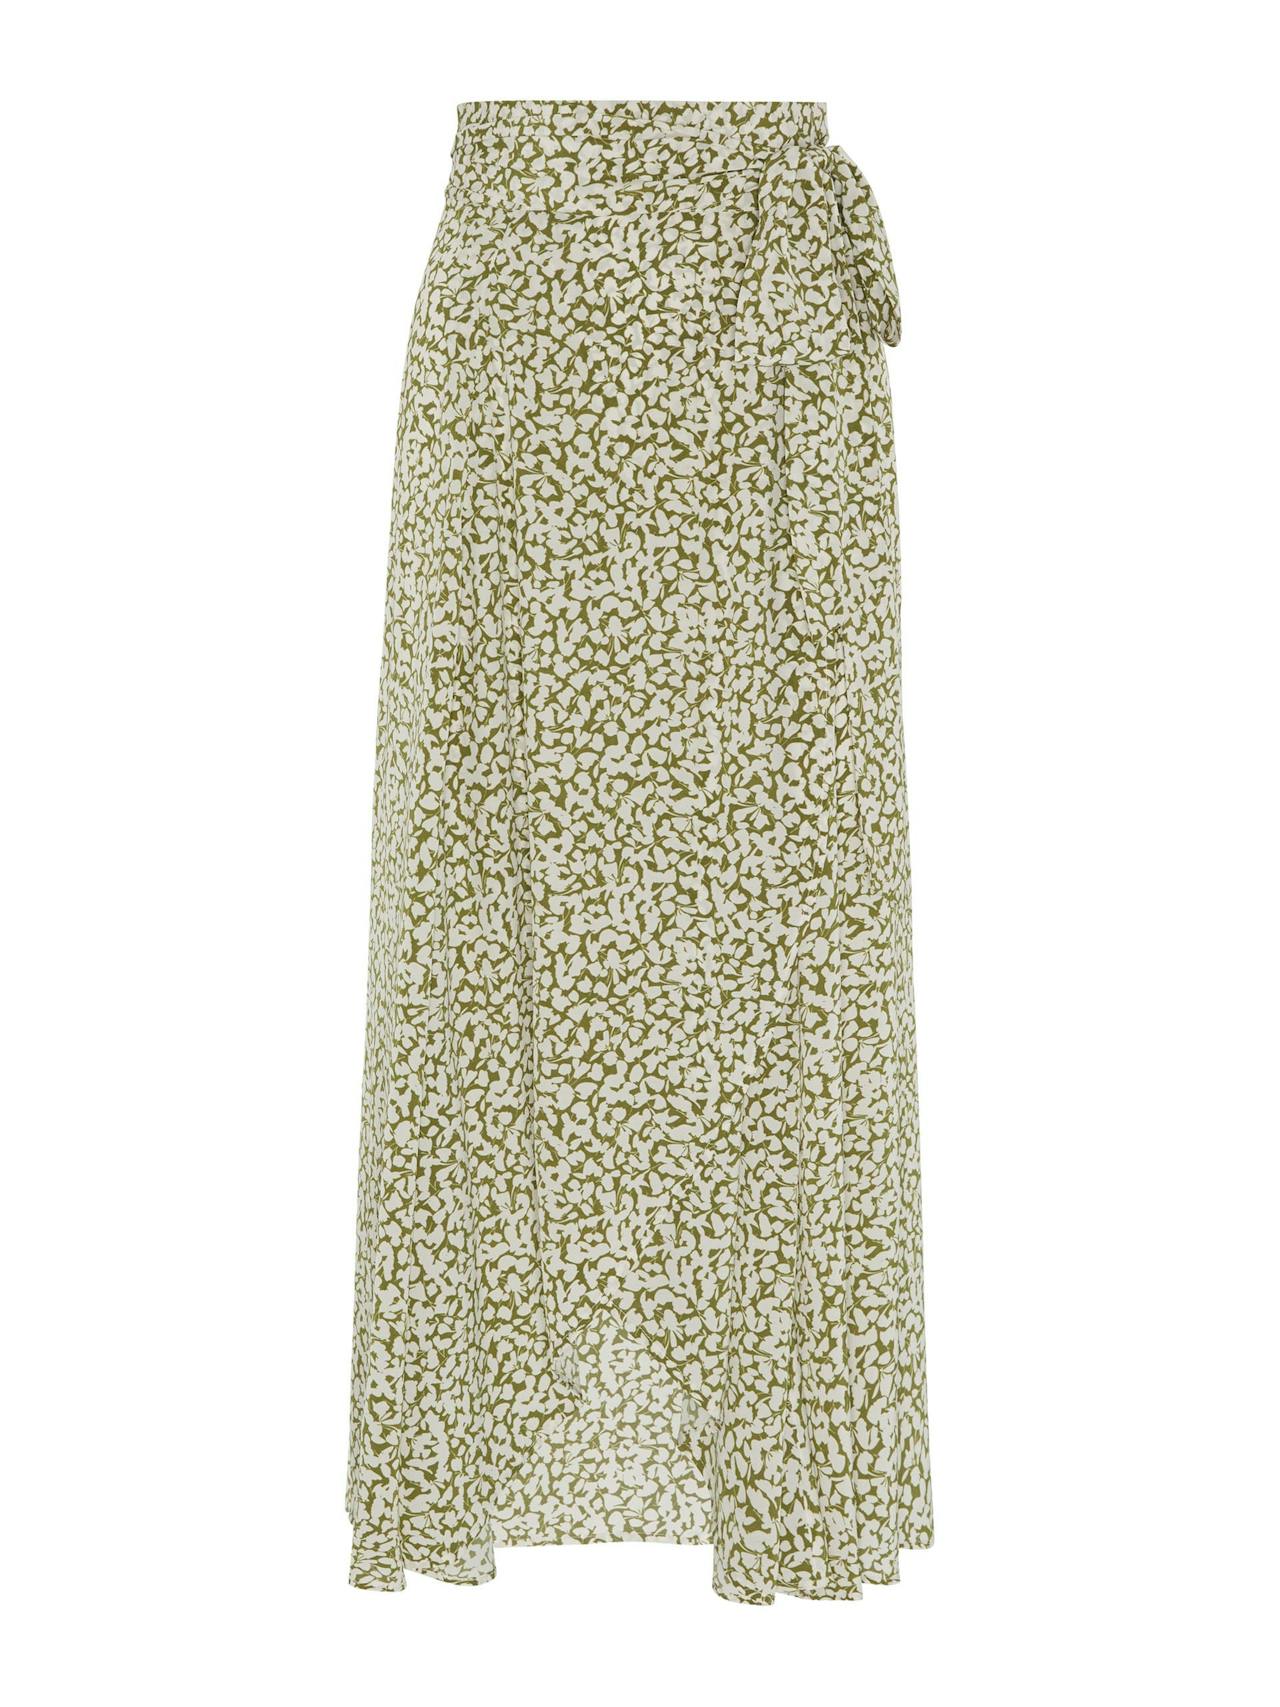 Milu skirt in crepe de chine ditsy green